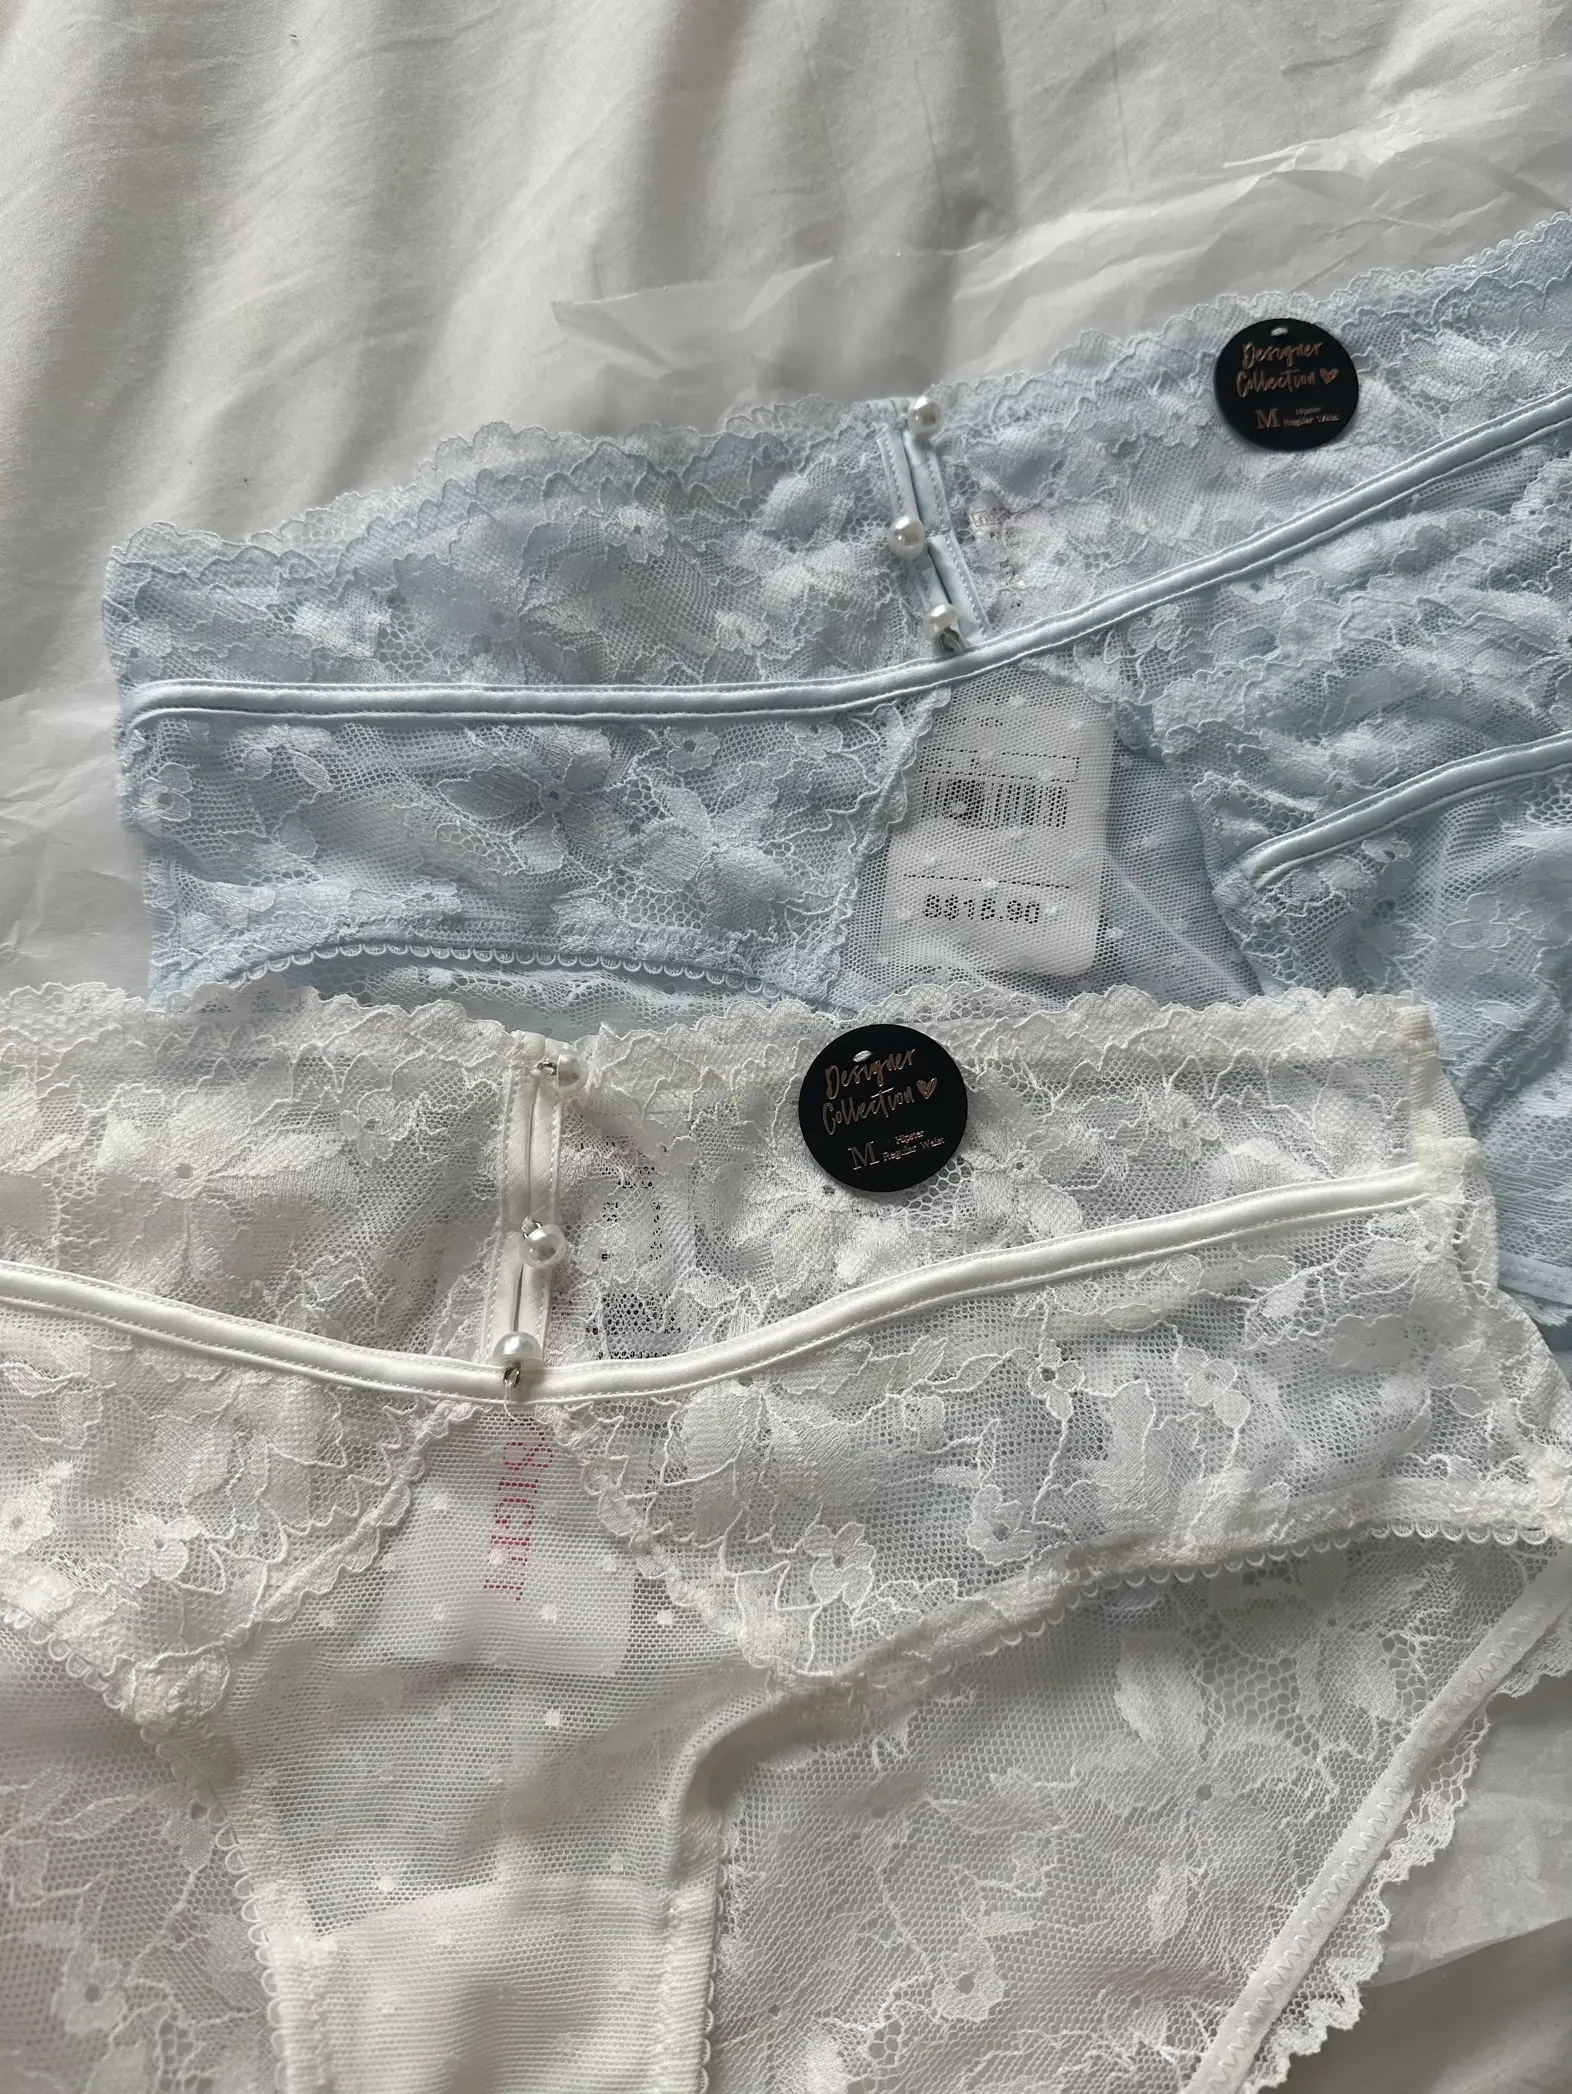 $6 Pretty underwear SALES @ 6IXTY8IGHT 💕, Gallery posted by Dani ✨